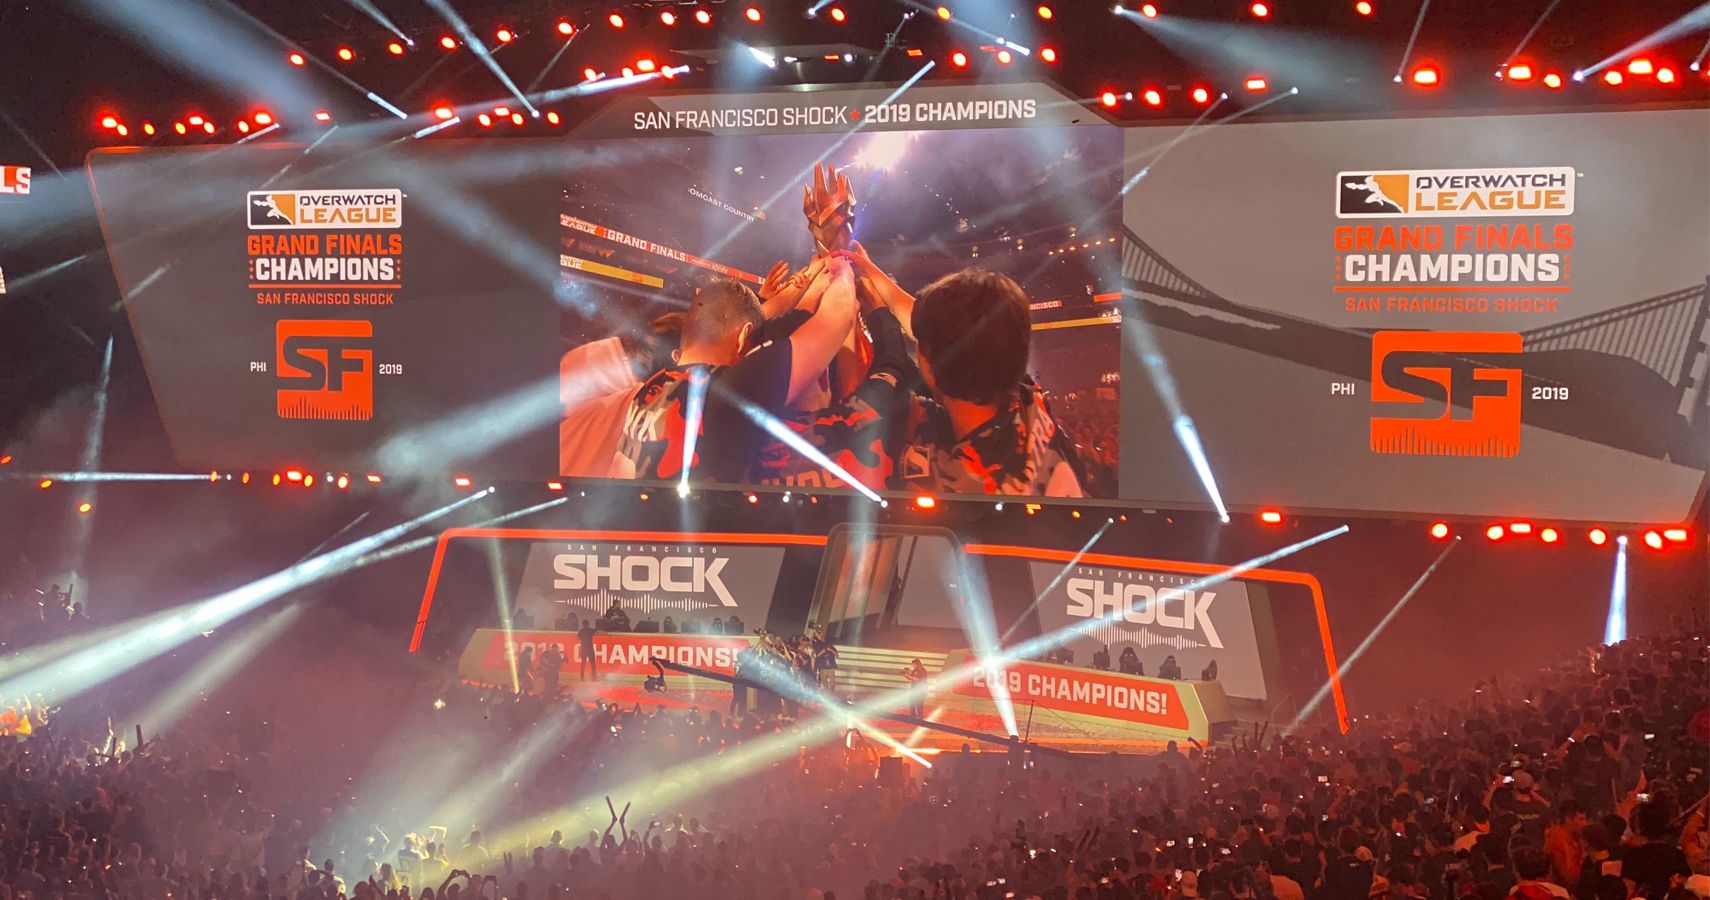 SF Shock wins the Overwatch League Grand Finals in 2019.